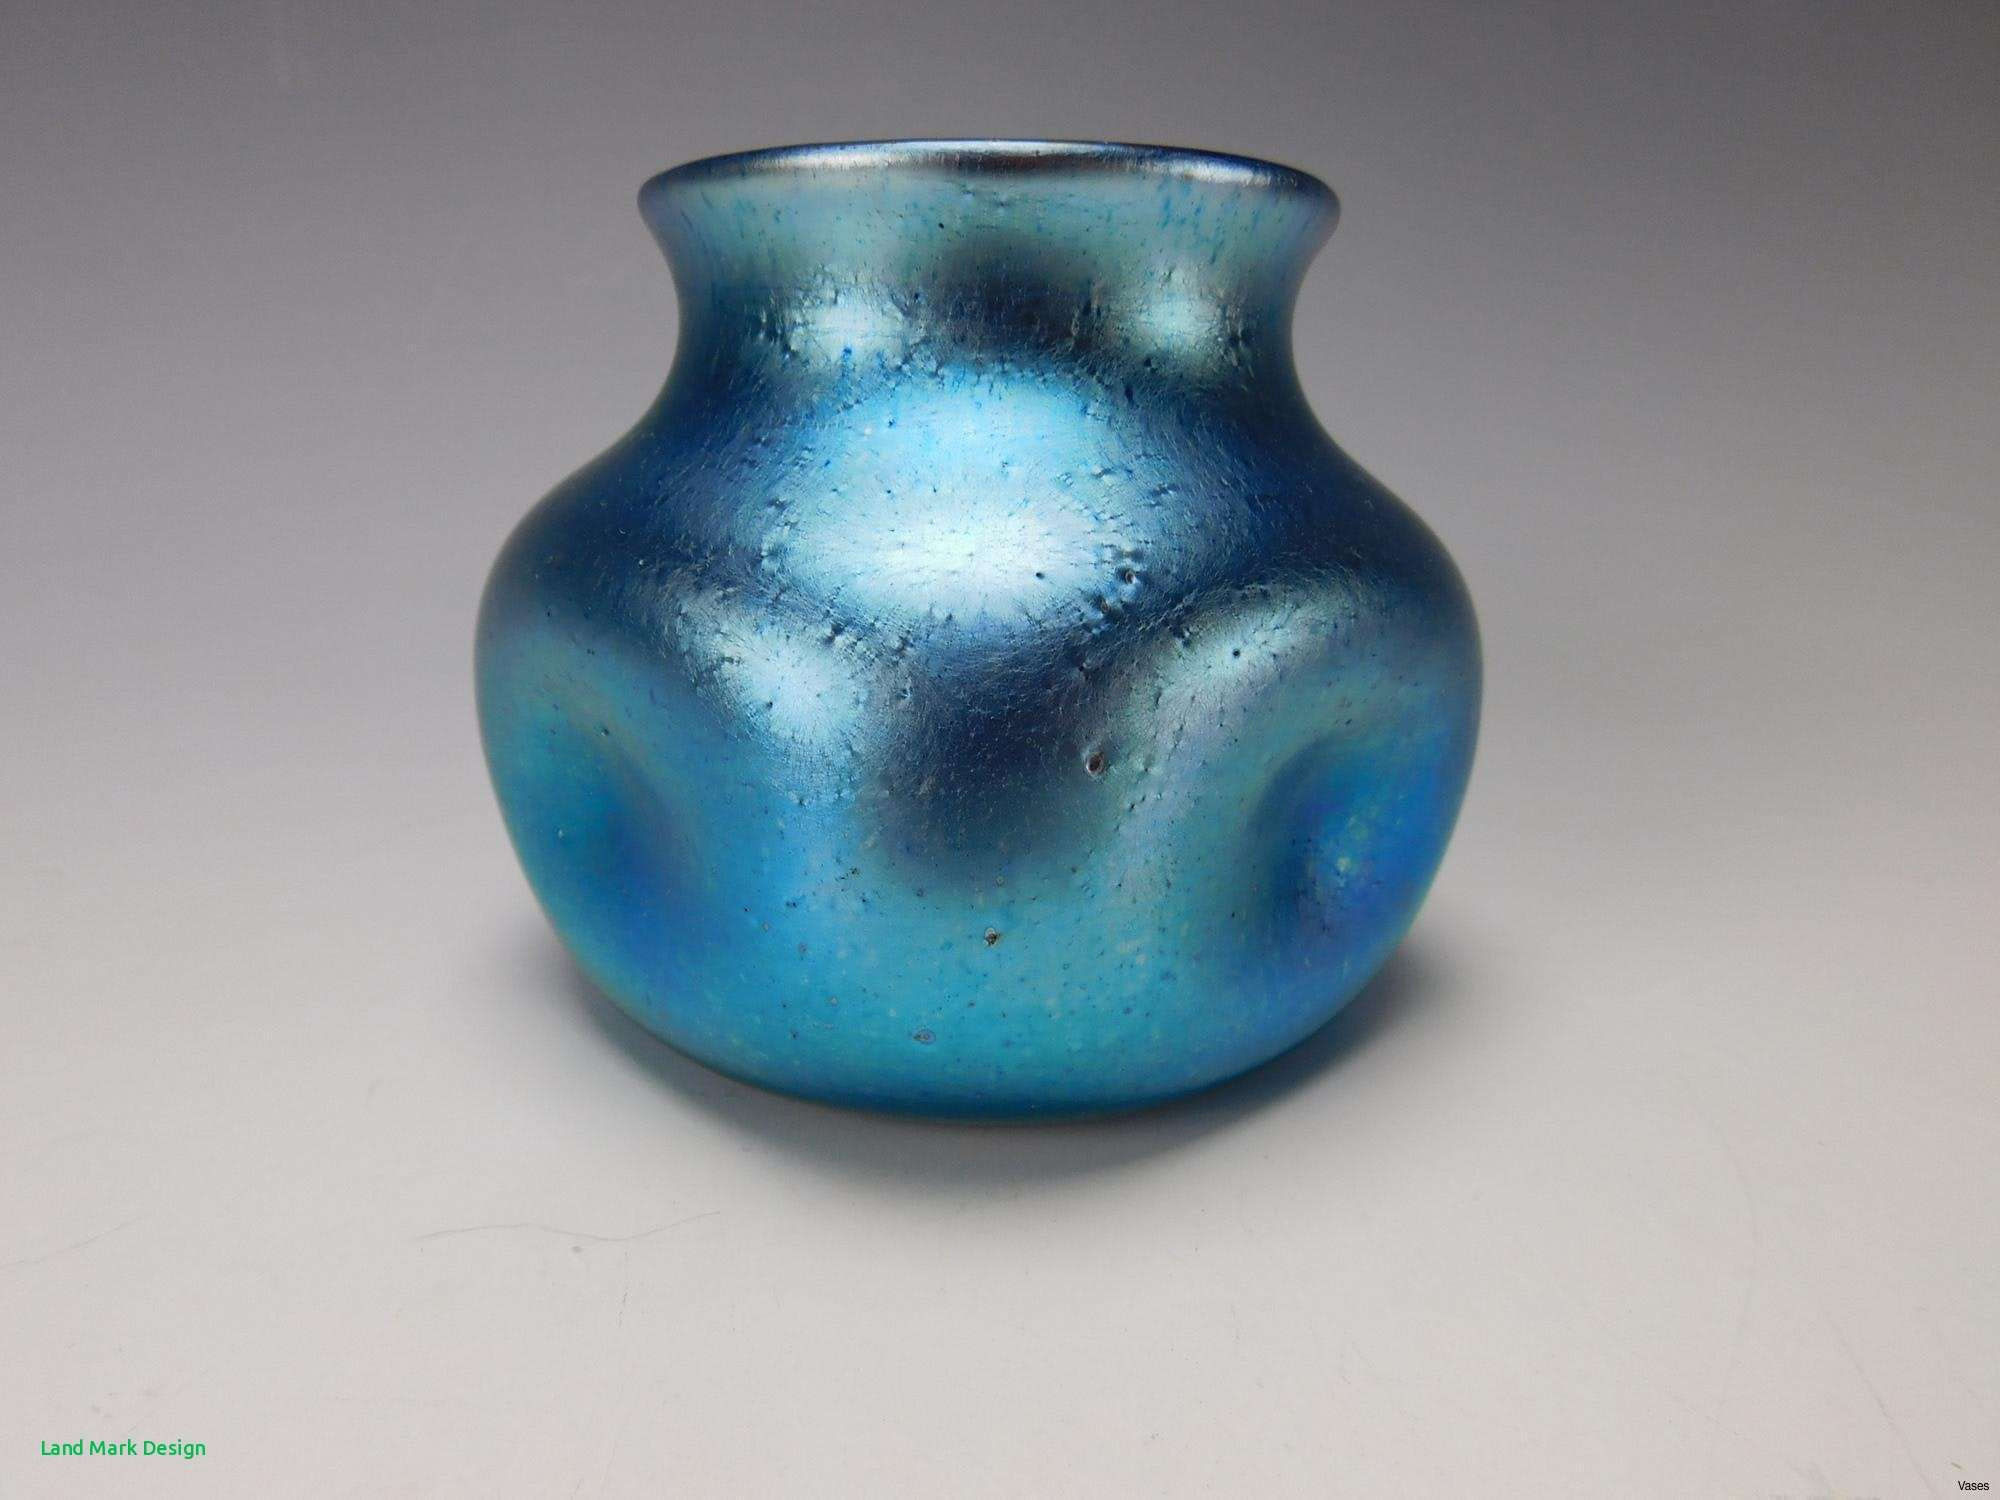 tiffany vases for sale of 37 fenton blue glass vase the weekly world with regard to beige and blue design